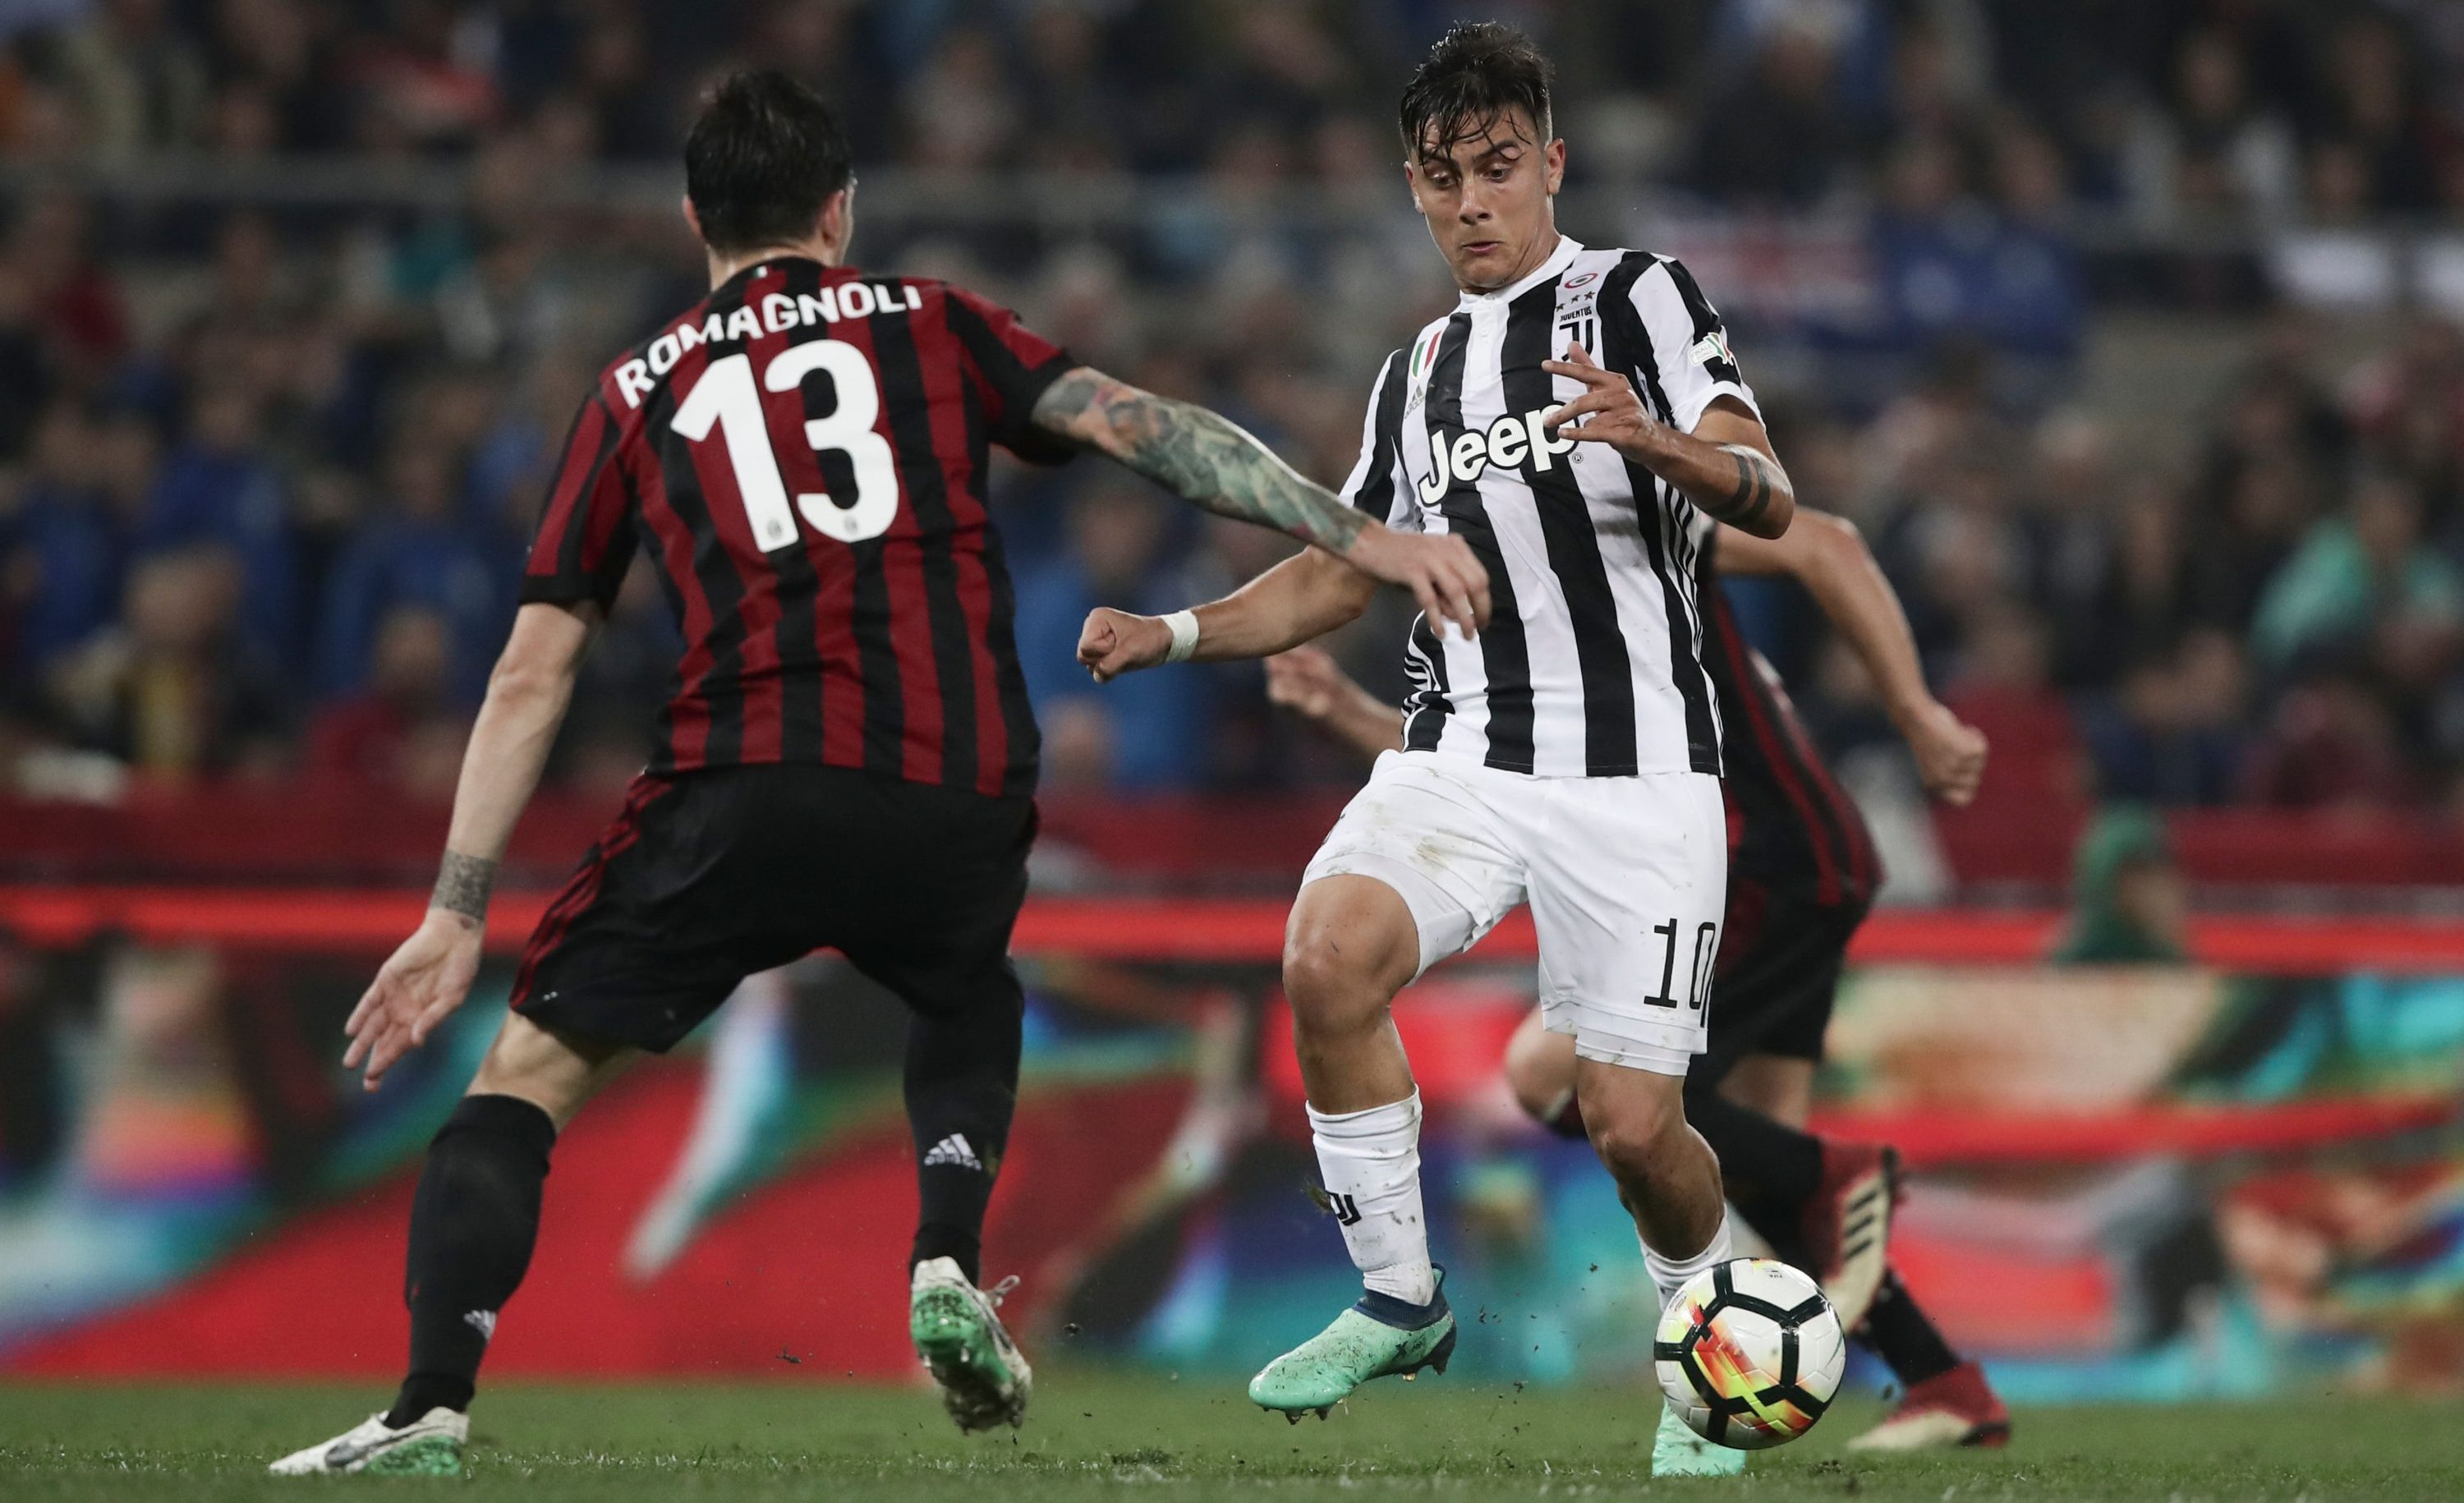 Juventus' forward from Argentina Paulo Dybala (R) vies with AC Milan's defender from Italy Alessio Romagnoli during the Italian Tim Cup (Coppa Italia) final Juventus vs AC Milan at the Olympic stadium on May 9, 2018 in Rome. (Photo by Isabella BONOTTO / AFP) (Photo credit should read ISABELLA BONOTTO/AFP/Getty Images)